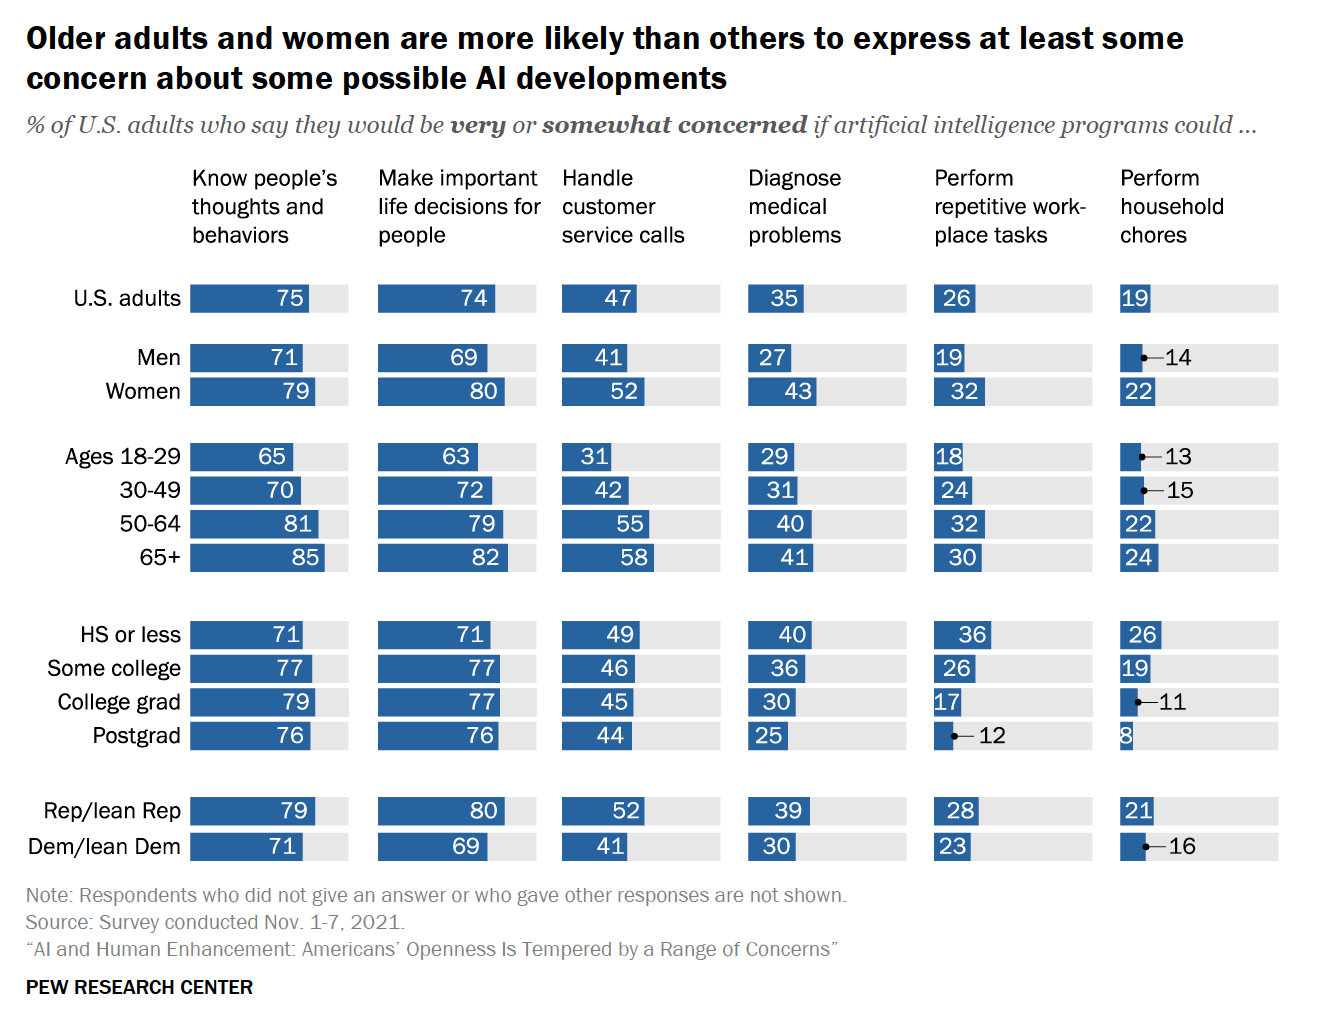 Pew Research chart listing common concerns about possible AI developments by gender, age, education, and political party.